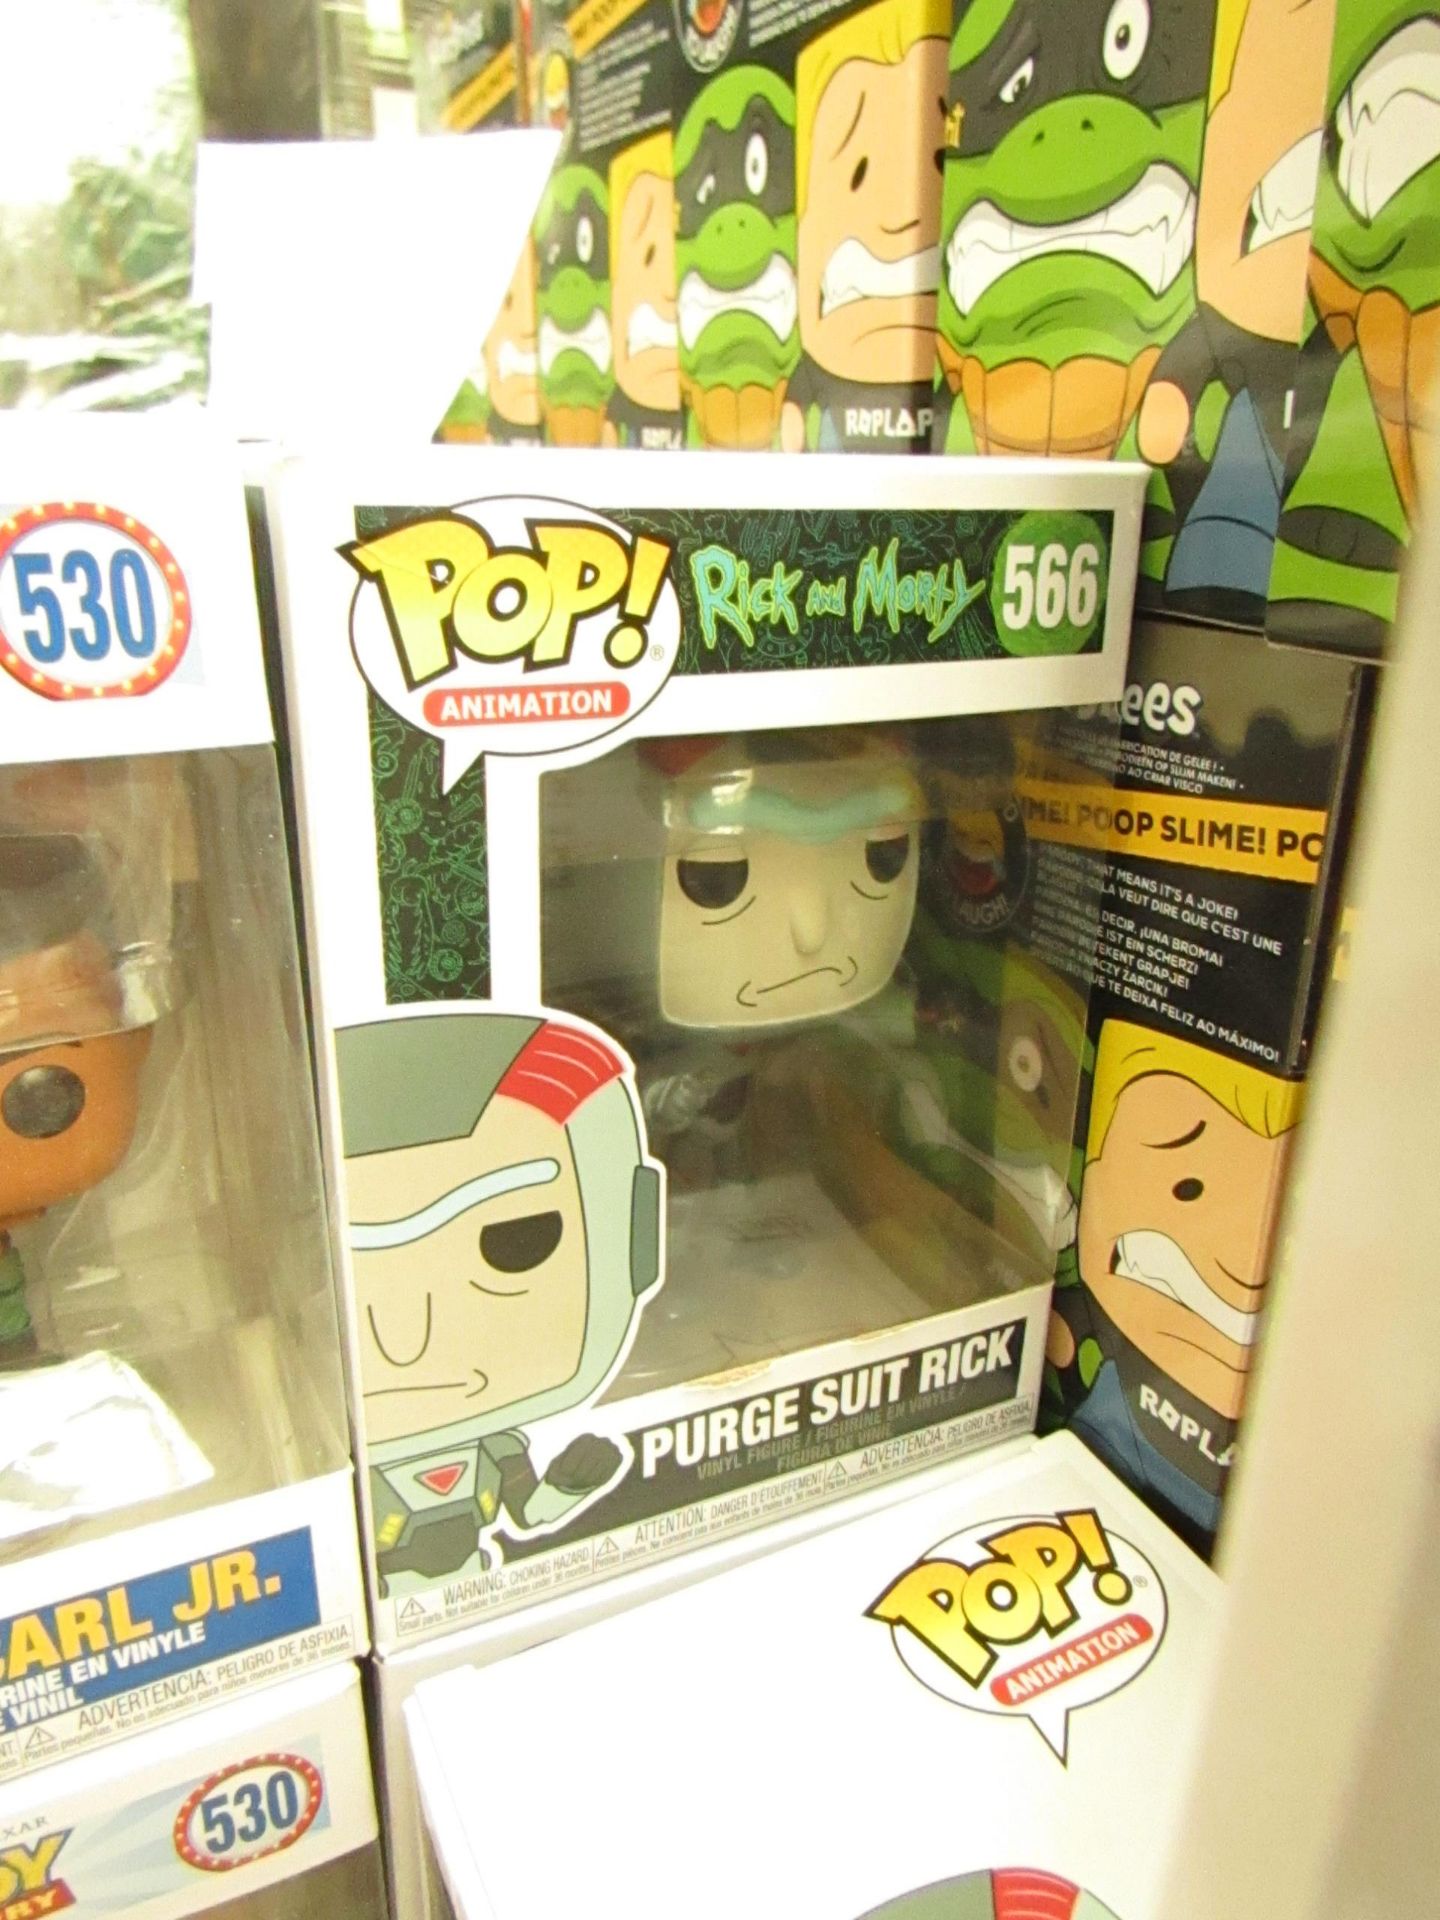 POP! - Rick and Morty - Purge Suit Rick - Vinyl Figure - Collectable. New & Packaged.